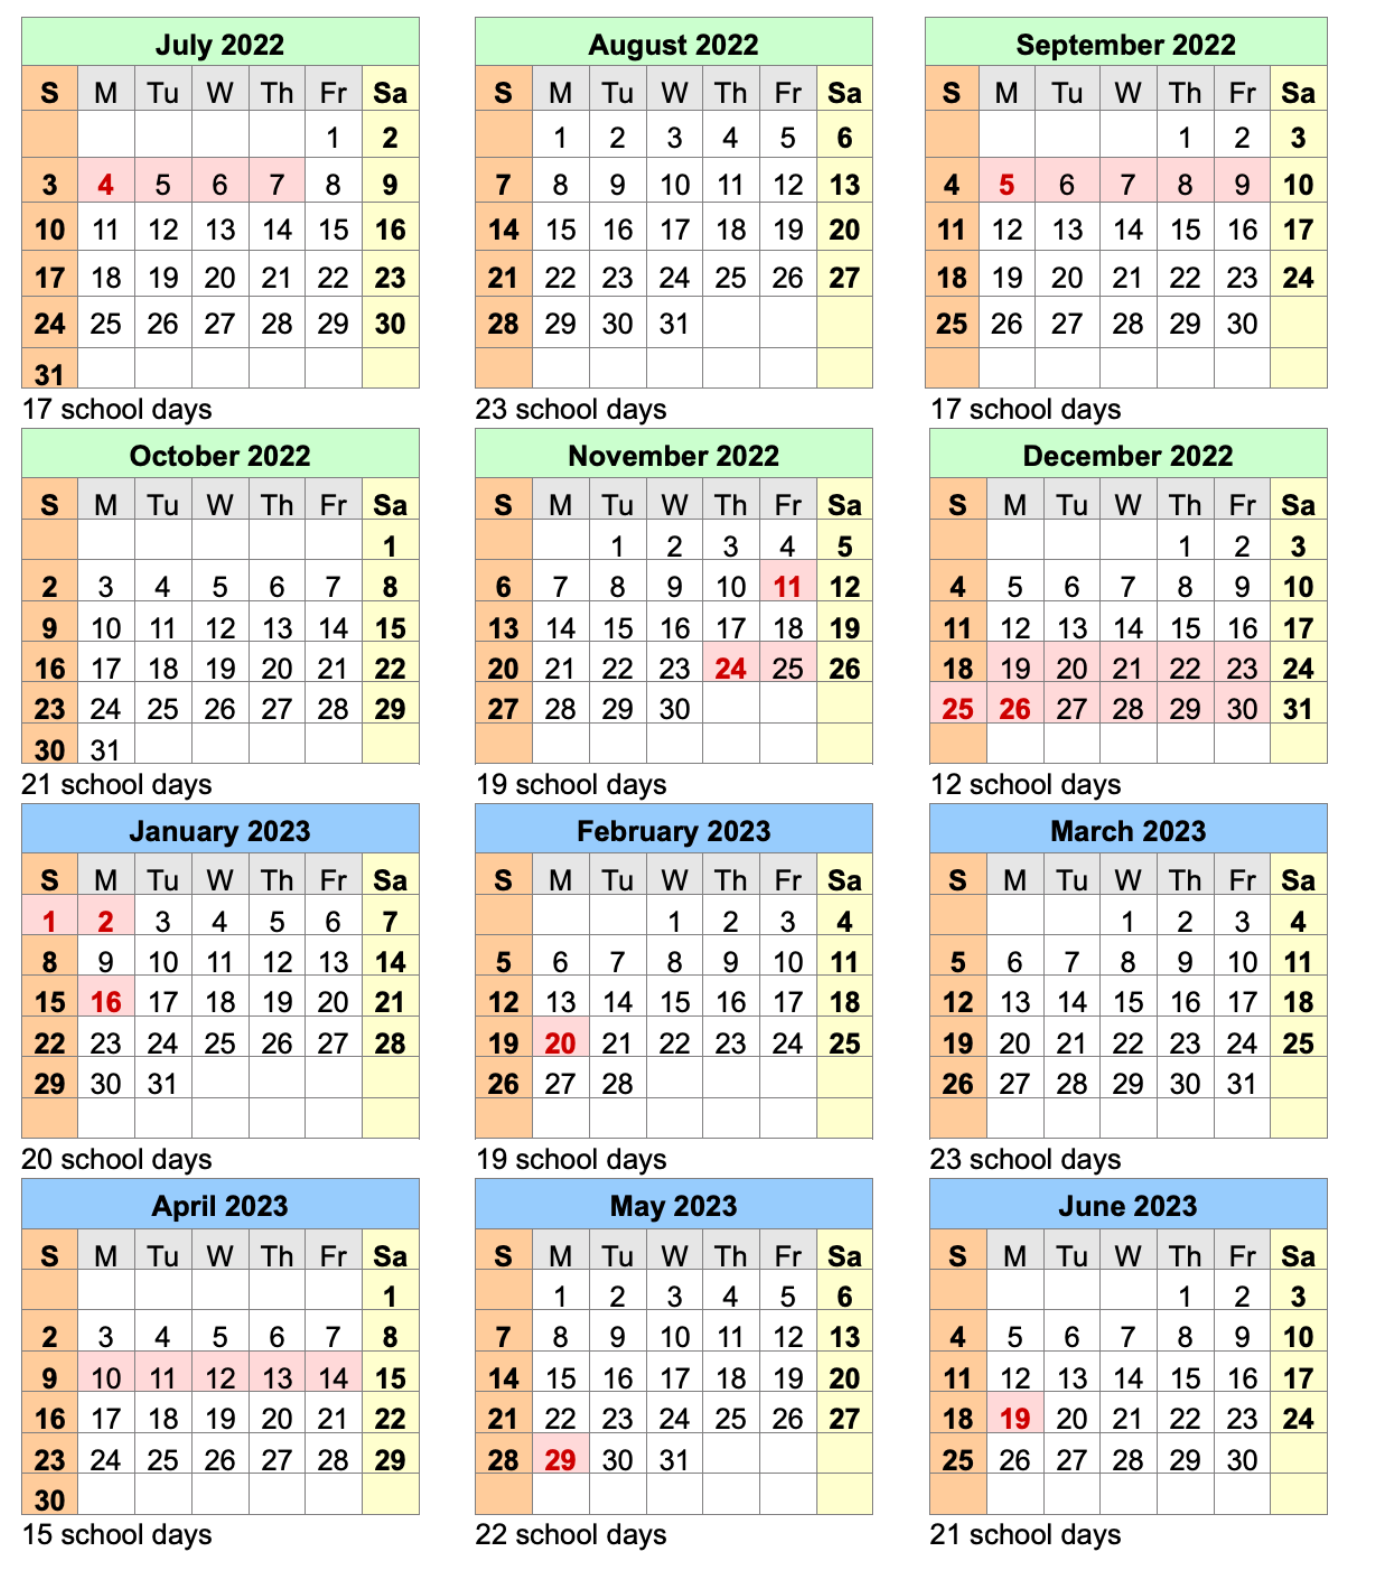 OASIS calendar for the 2021-2022 school year